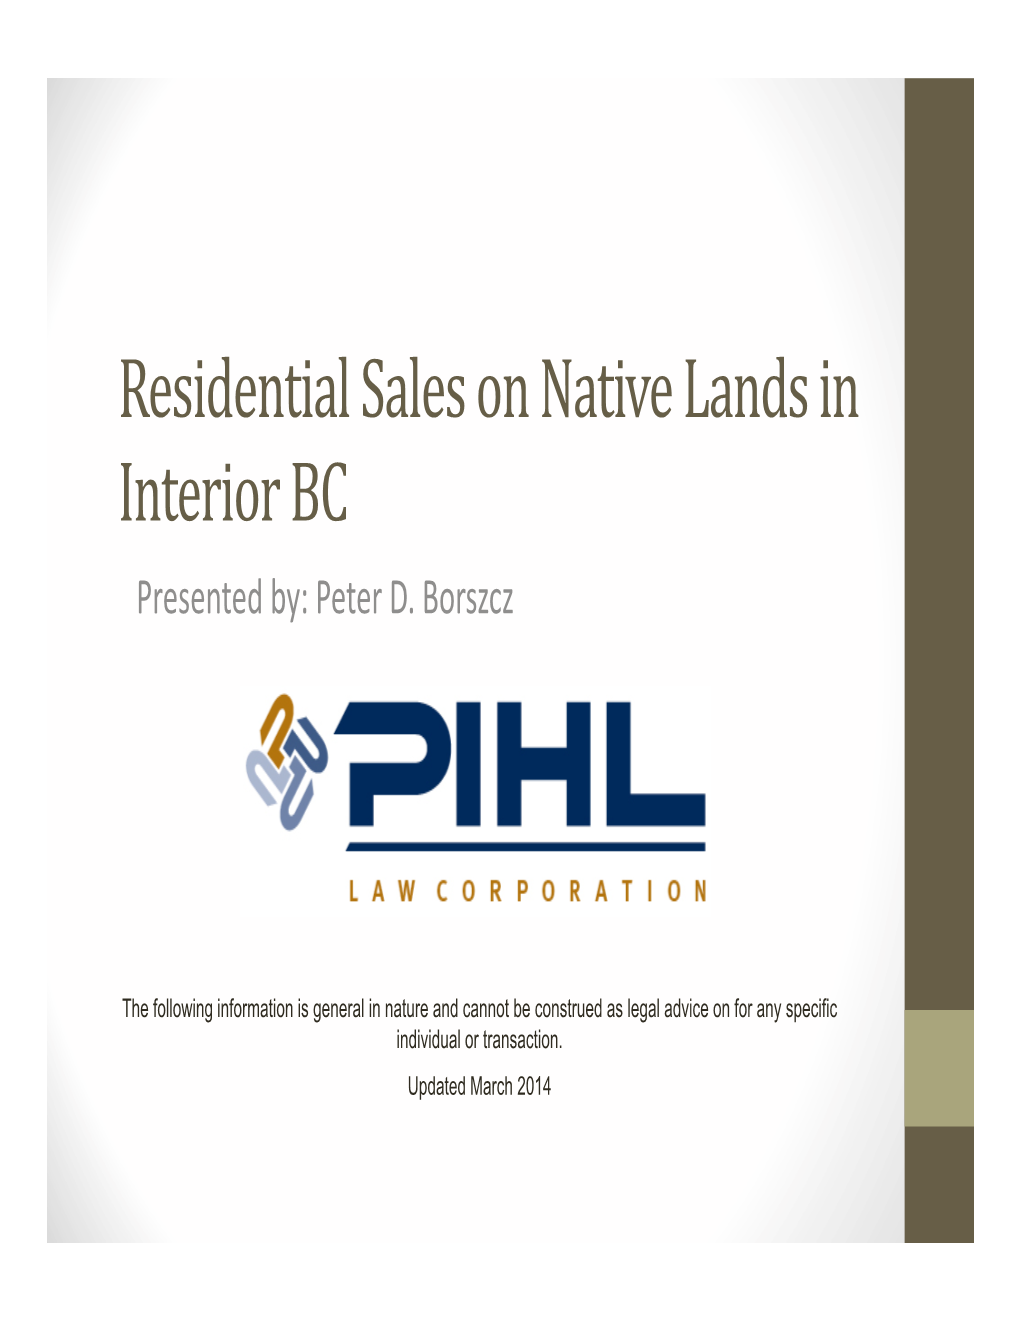 Residential Sales on Native Lands in Interior BC Presented By: Peter D